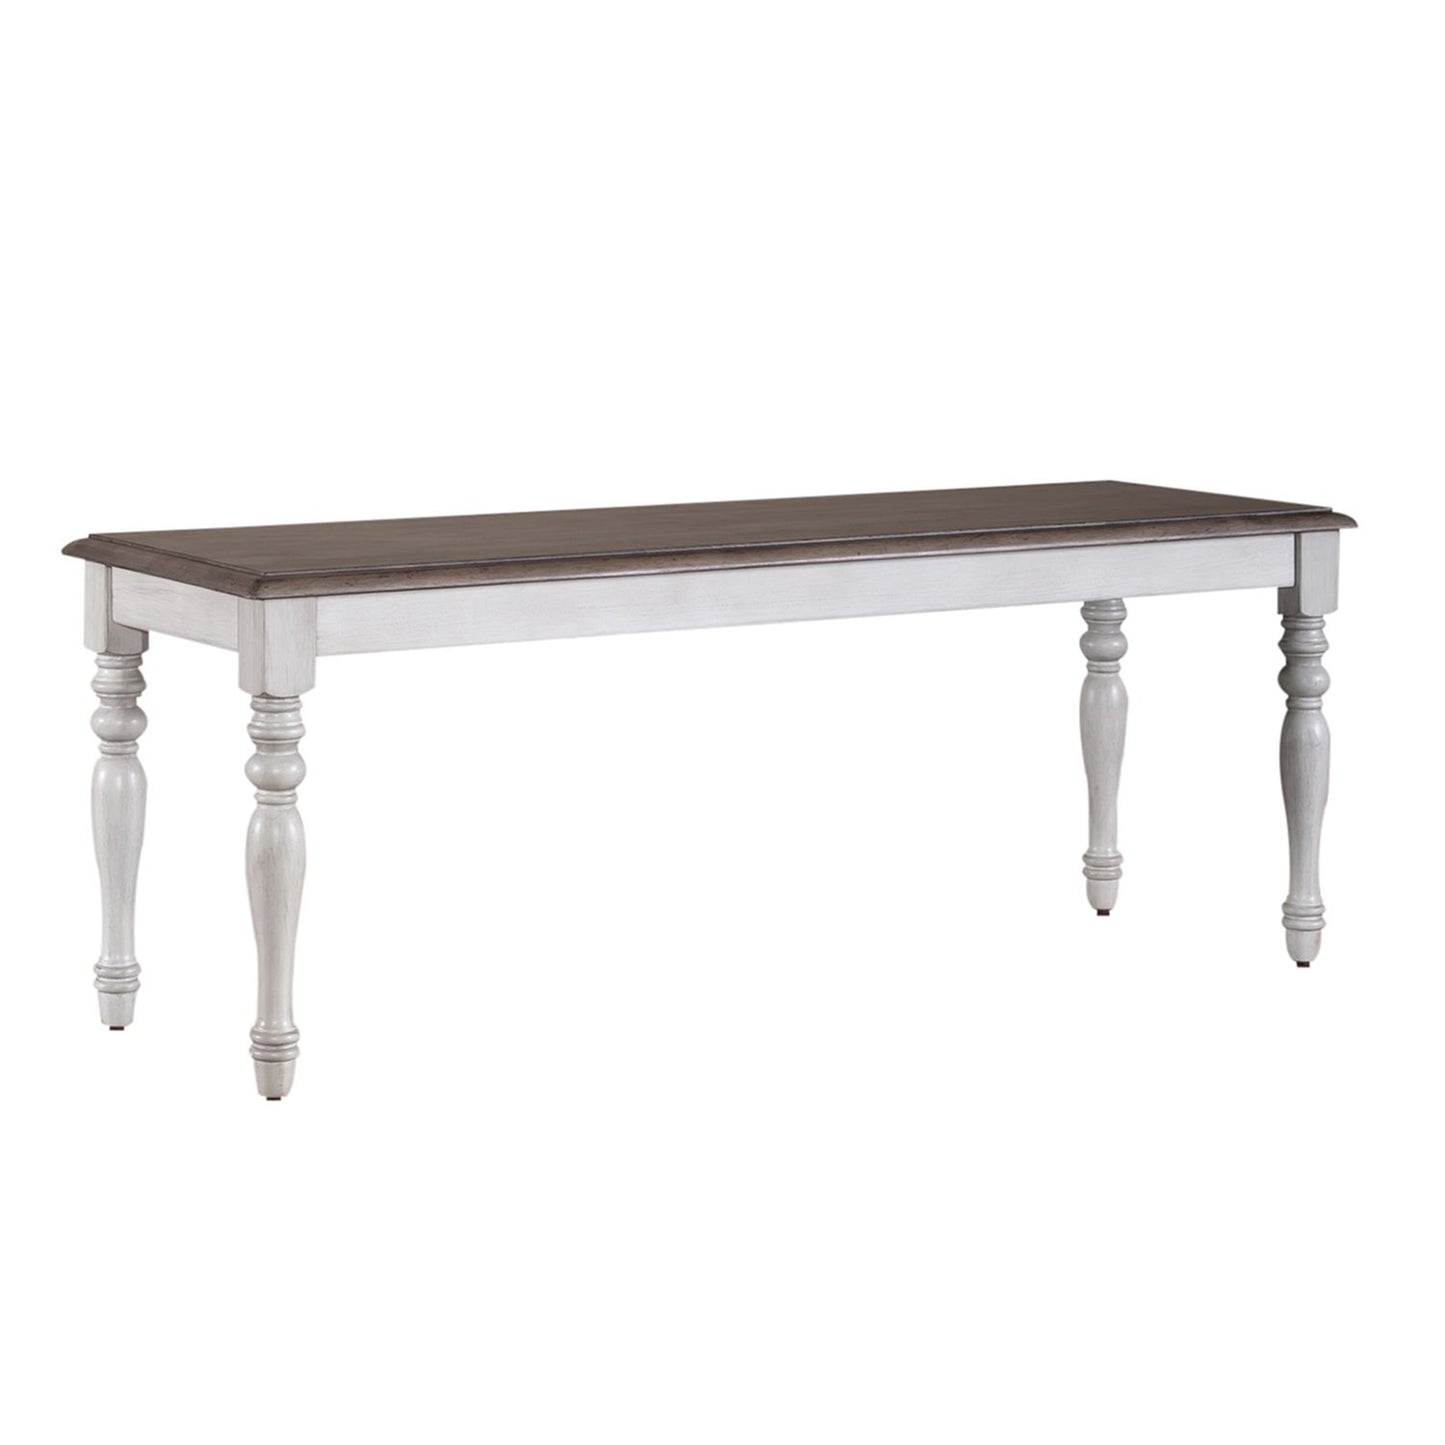 Chandria Solid Wood Bench - Antique White and Weathered Pine Finish